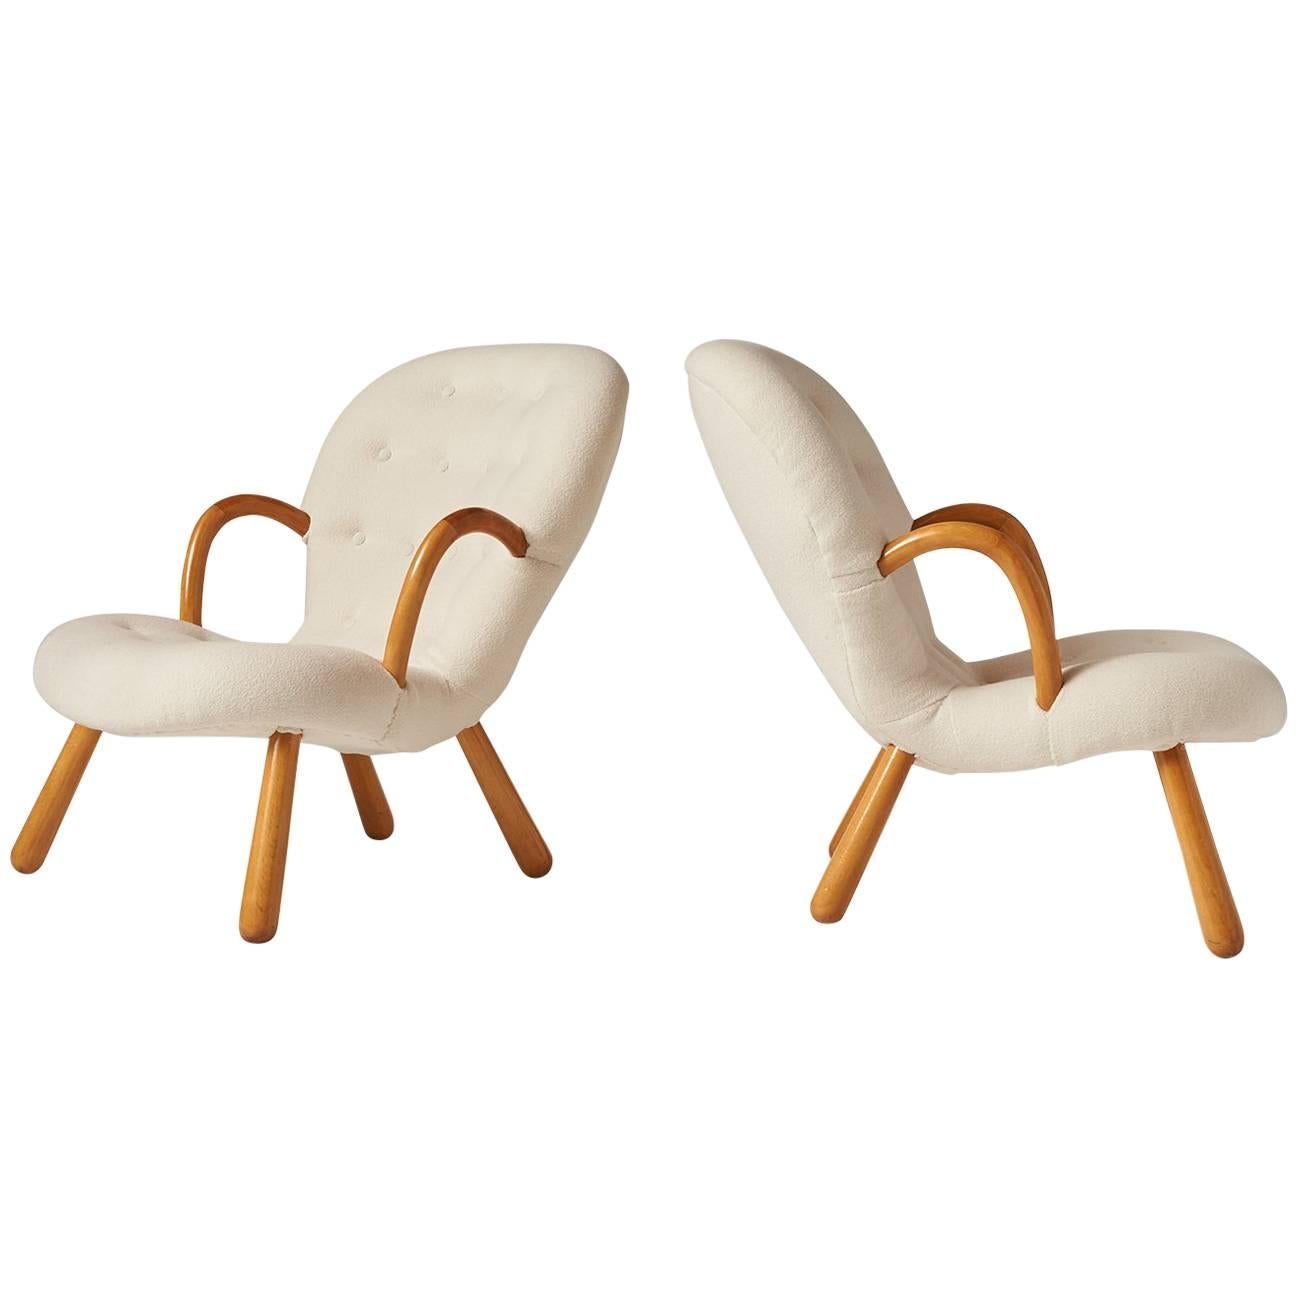 Pair of "Clam" Chairs by Philip Arctander